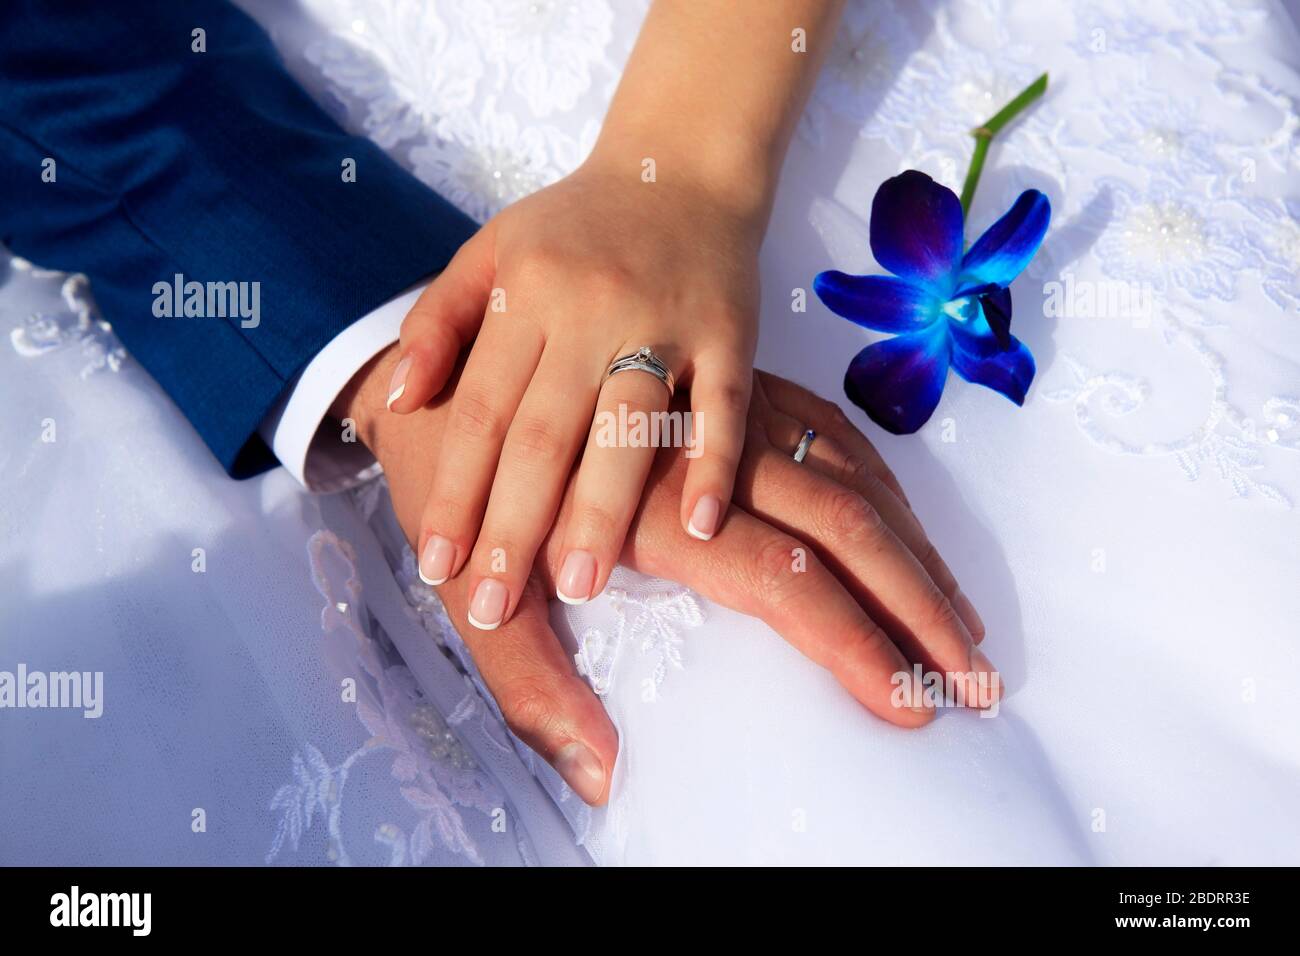 Hands of the bride and groom on the background of a wedding dress. Stock Photo